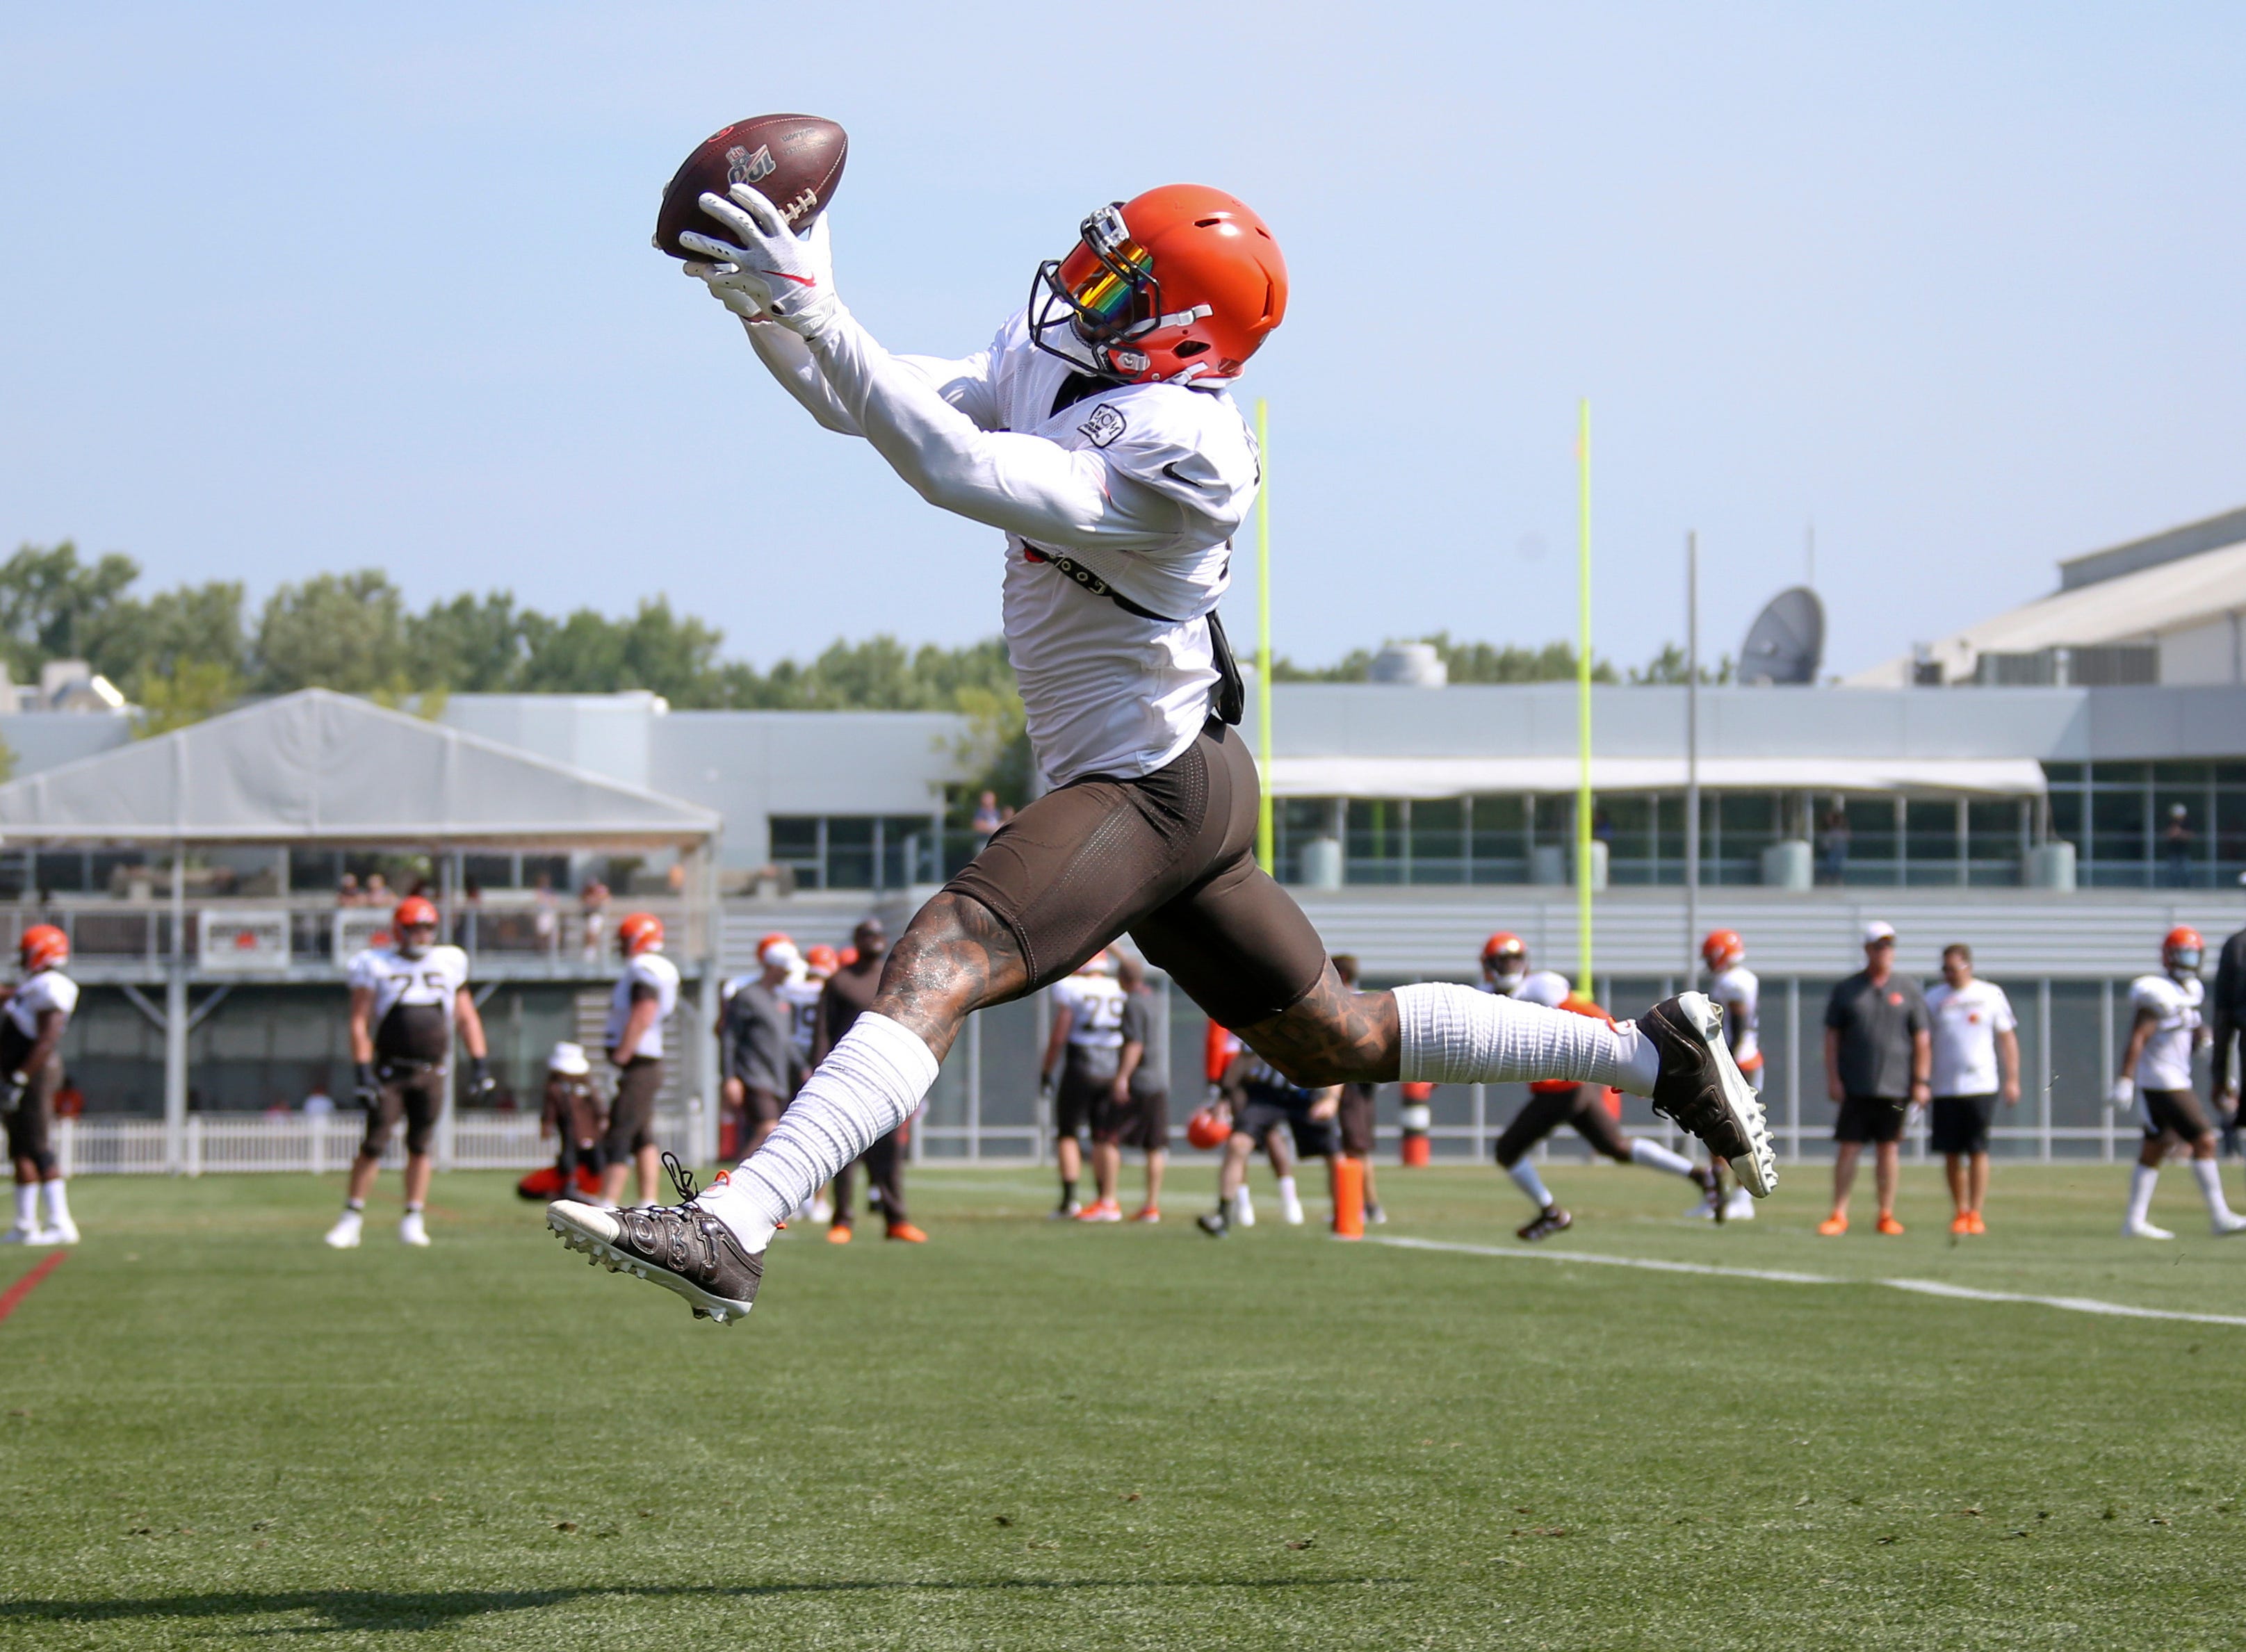 Unhip: Browns' Beckham slowed by injury heading into opener